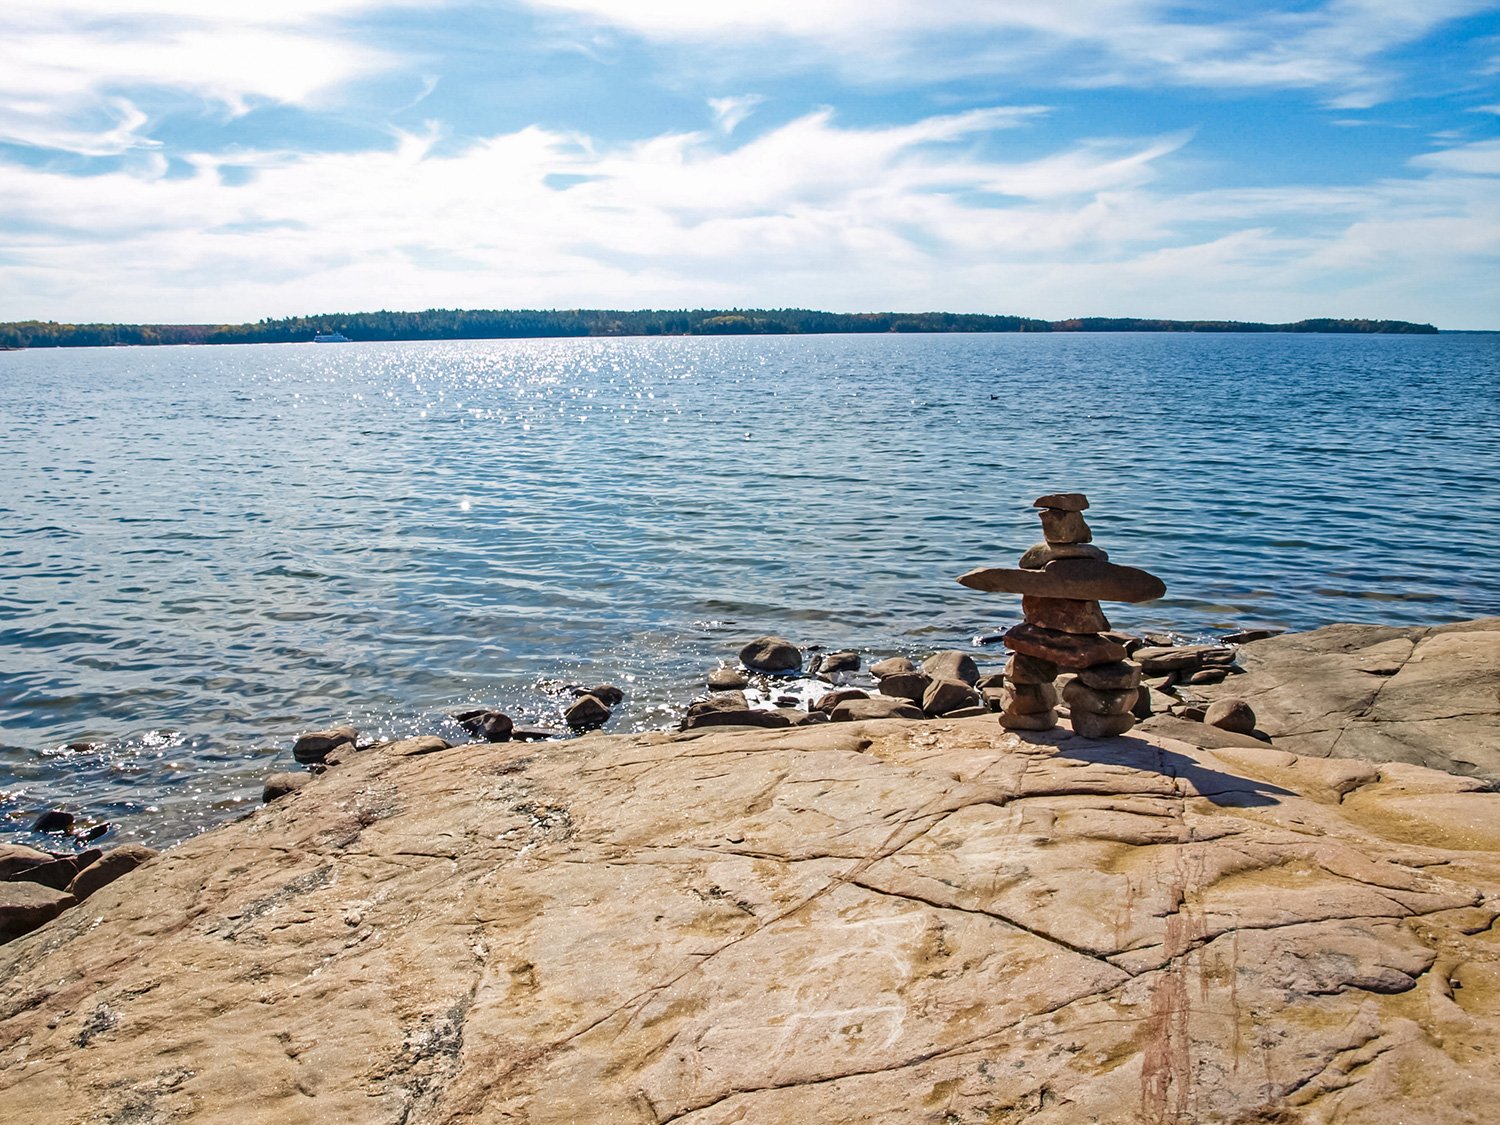 Inukshuk by the water